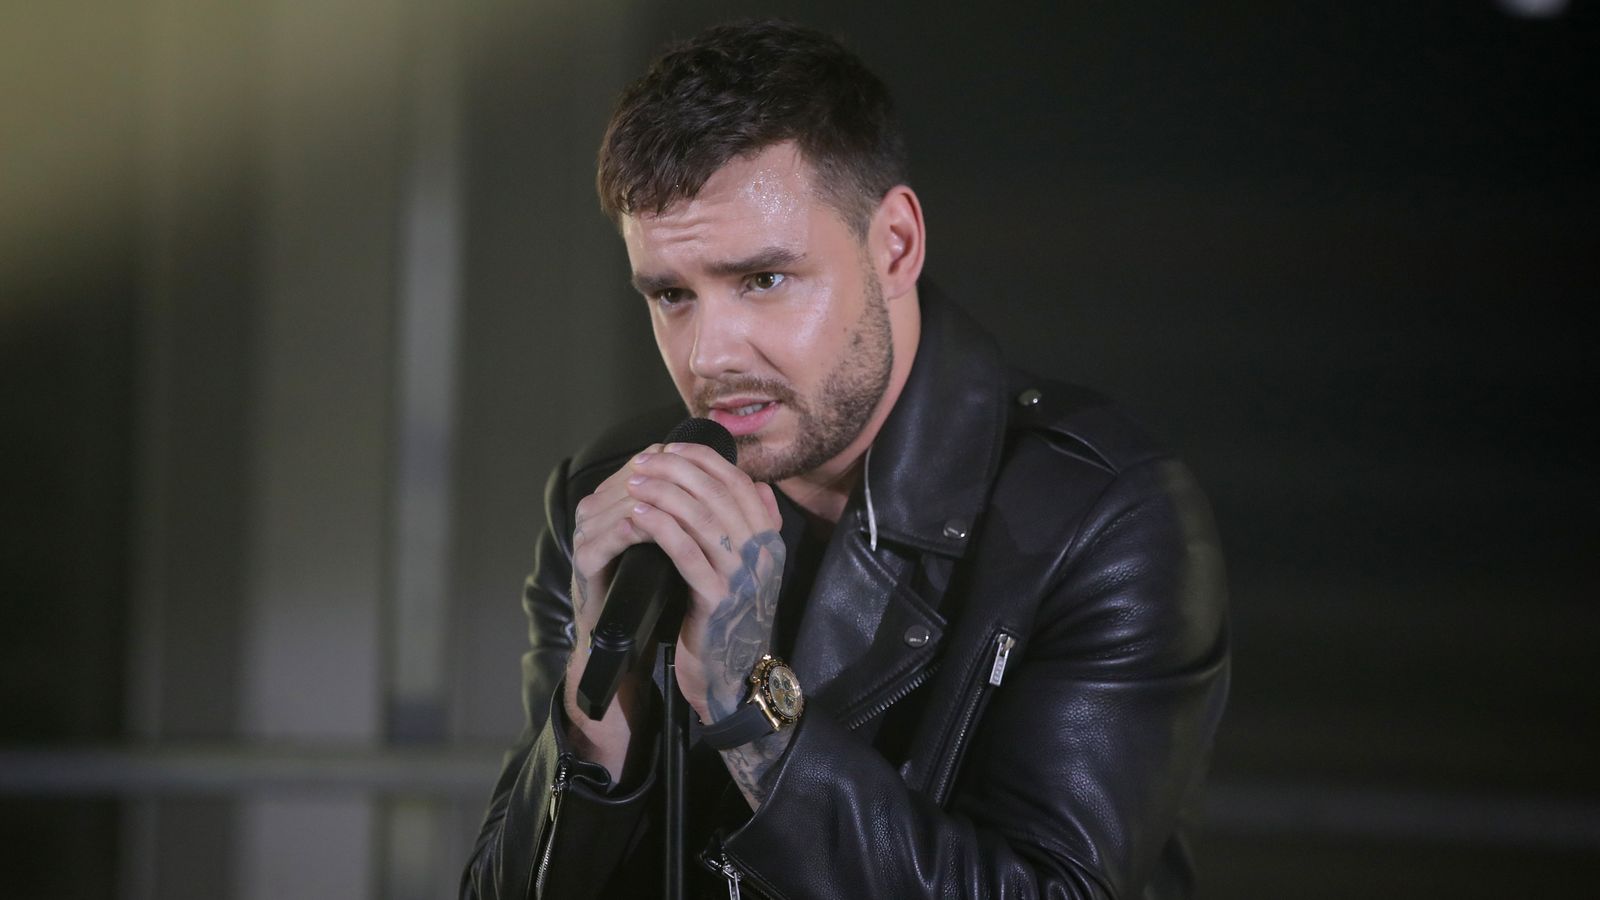 'I'm lucky to be here': Liam Payne opens up about suicidal thoughts and relationship with Cheryl - Sky News